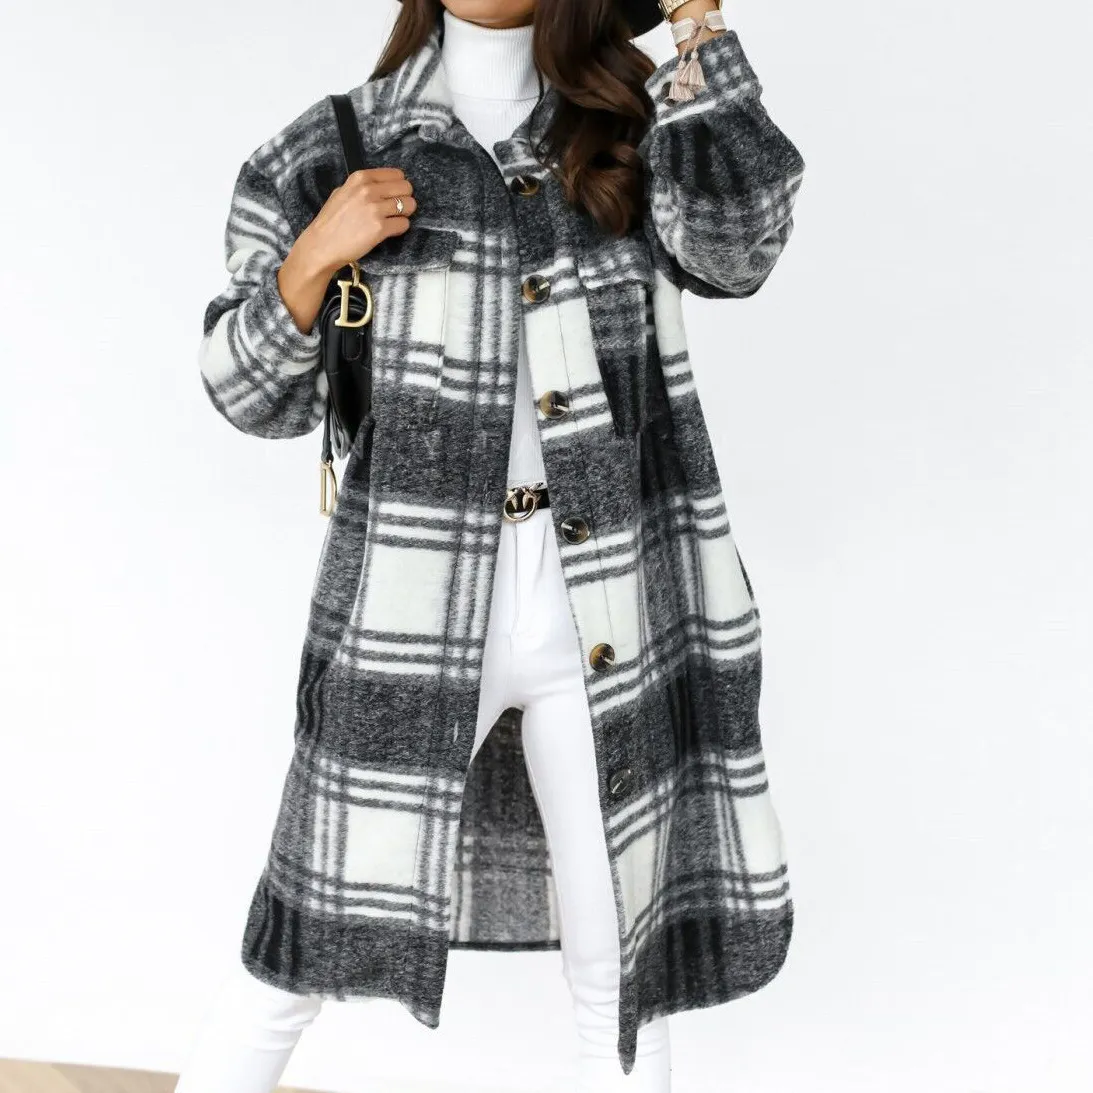 txfq2023 Single Breasted Trench Coat Fashion Long Autumn Winter Women s Clothing Long Sleeve Woolen Plaid